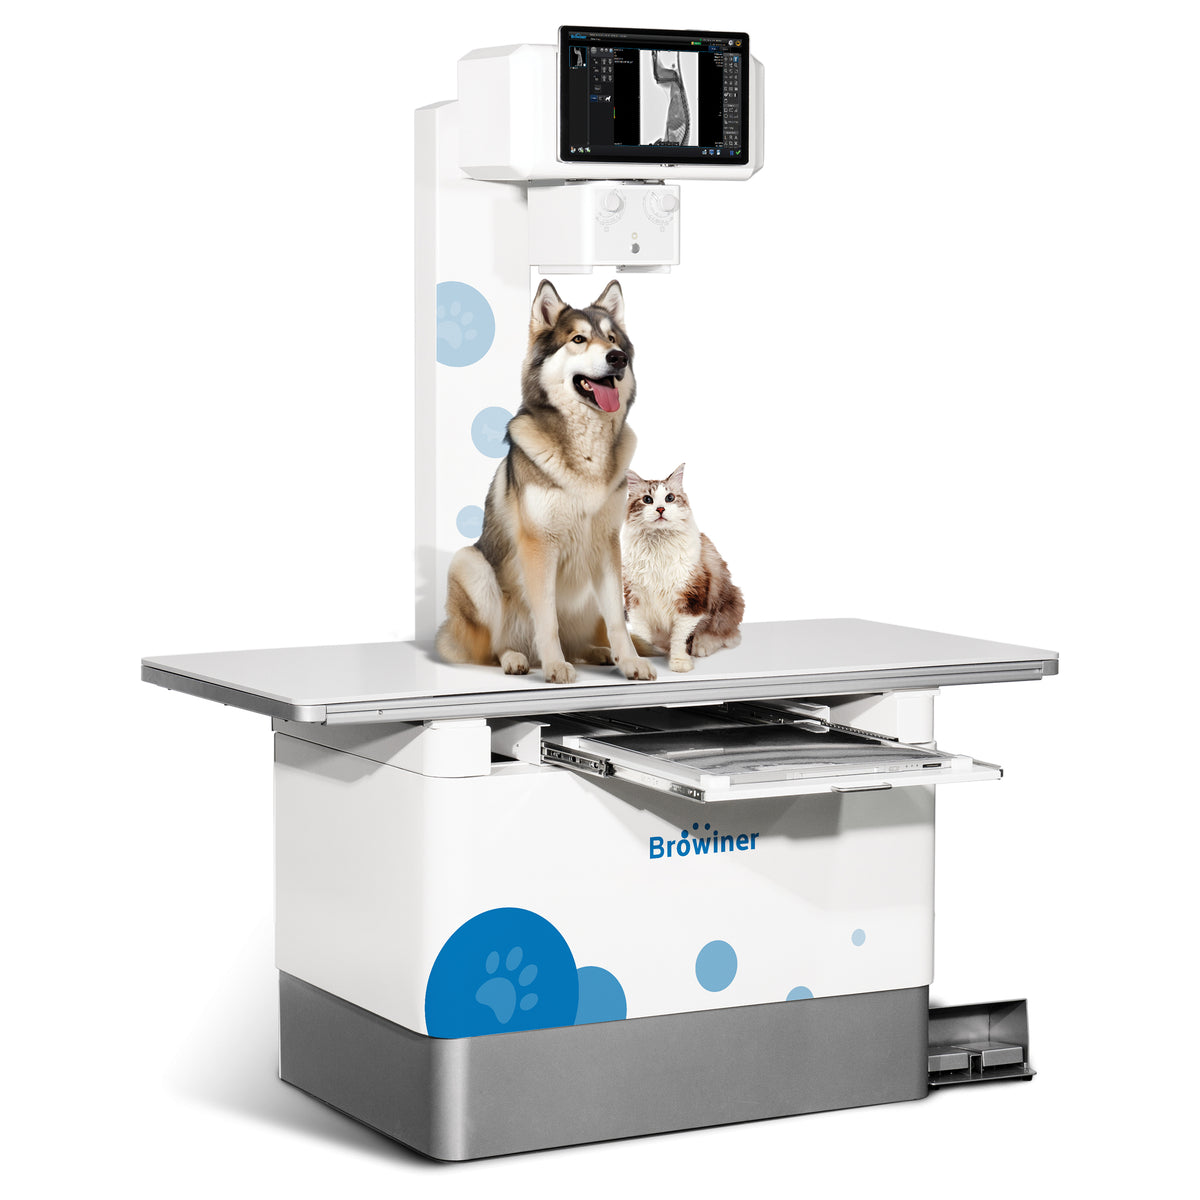 The ultimate veterinary digital X-ray system designed to empower vets with advanced imaging capabilities and enhanced diagnostic accuracy.